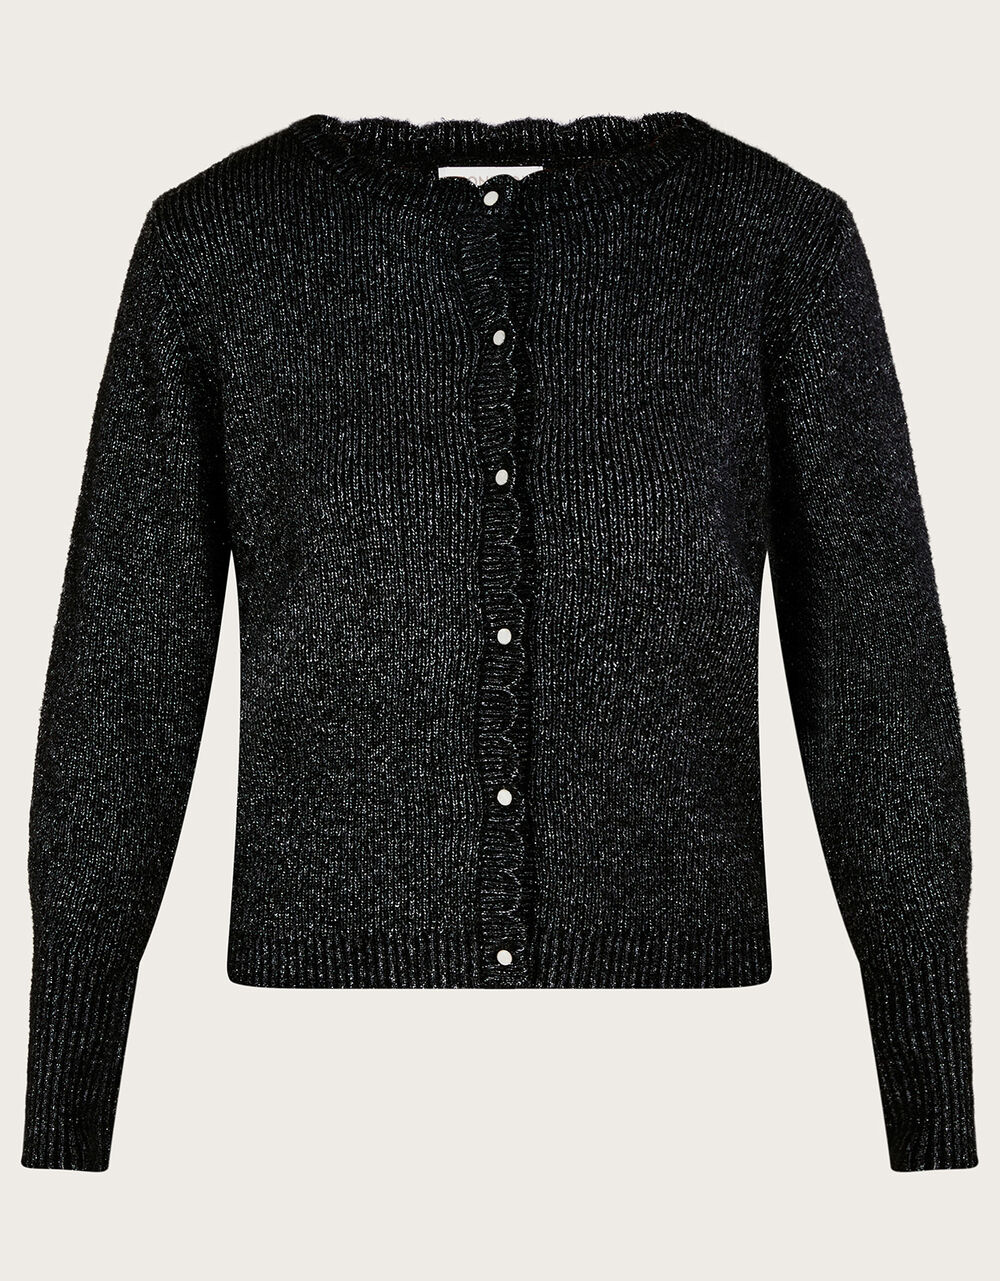 Scallop Edge Cardigan with Recycled Polyester Black | Women's Jackets ...